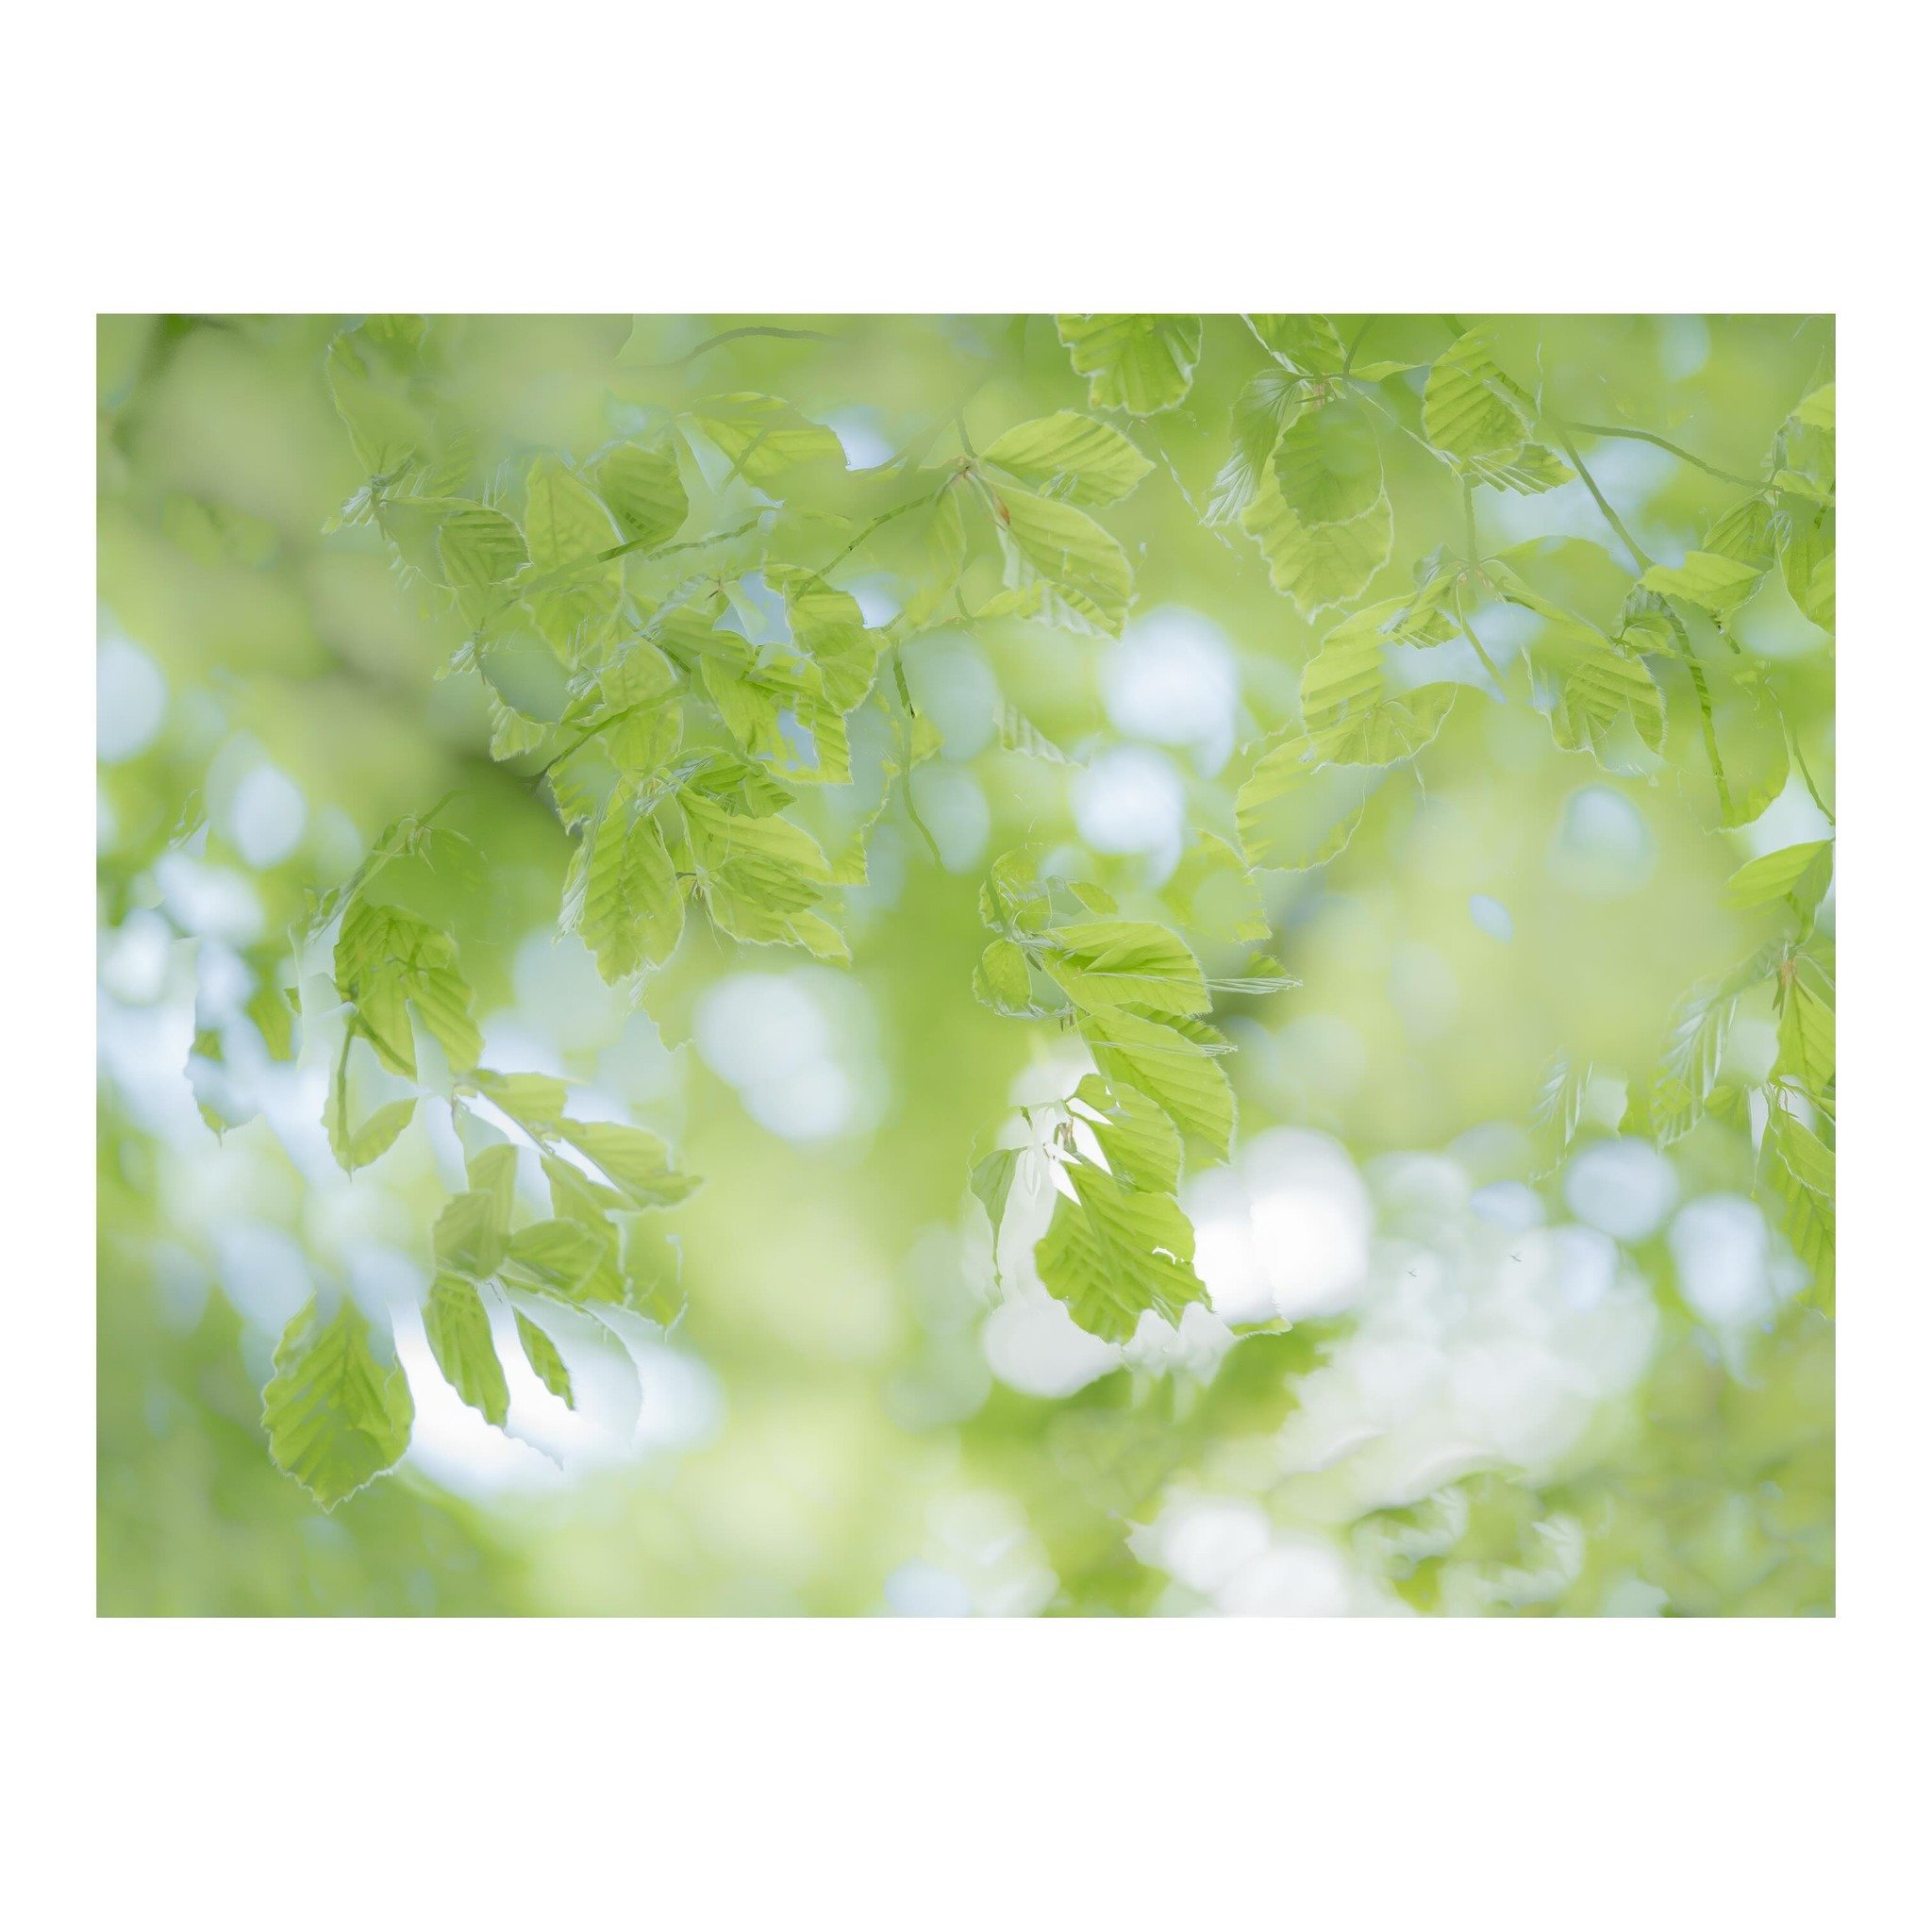 Spring greens
.
.
.
.
.
#spring #leaves #trees #woodland #impressionism abstractphotography #elementsphotomag #outdoorphotomag #landscapephotography #woodlandphotography #minimalmood #minimalism #abstractart #naturephotography #fineartphotography #ar